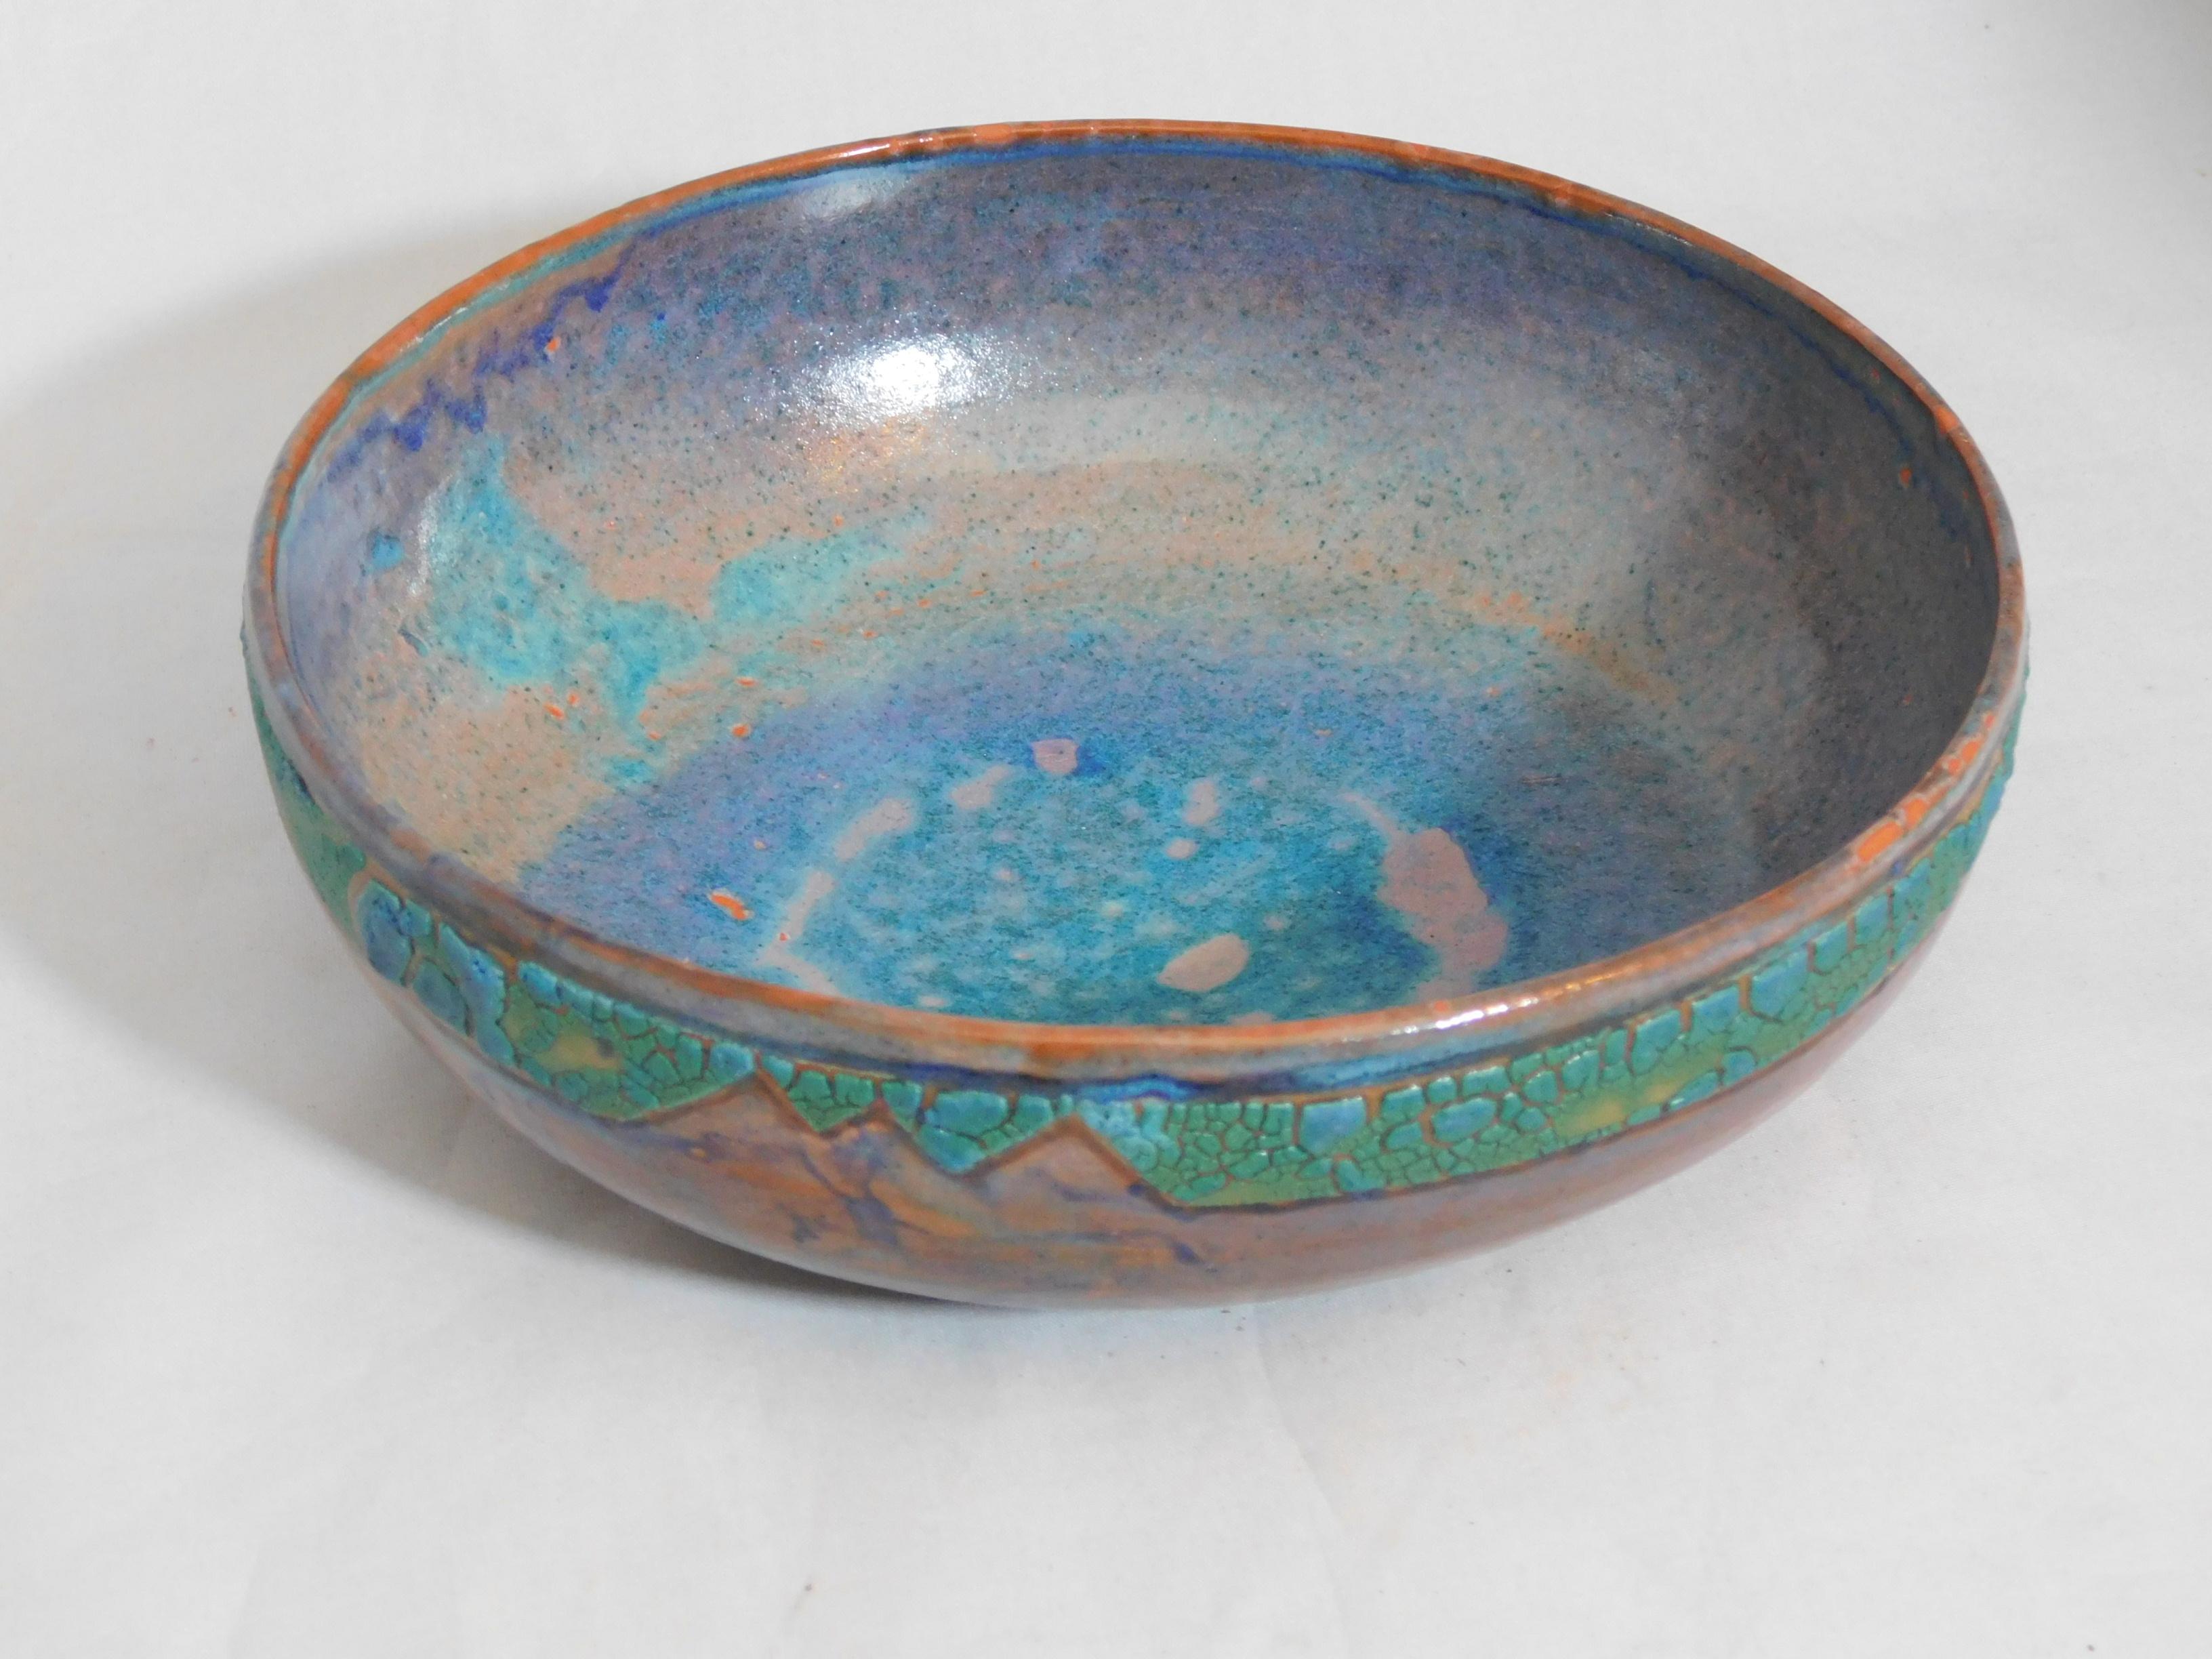 Wheel thrown sunset plaza earthenware bowl by ceramicist Andrew Wilder. This is a one of a kind object made in the ancient way- by hand in a small artisanal pottery. In this series Wilder explores the application of lichen under glazes to achieve